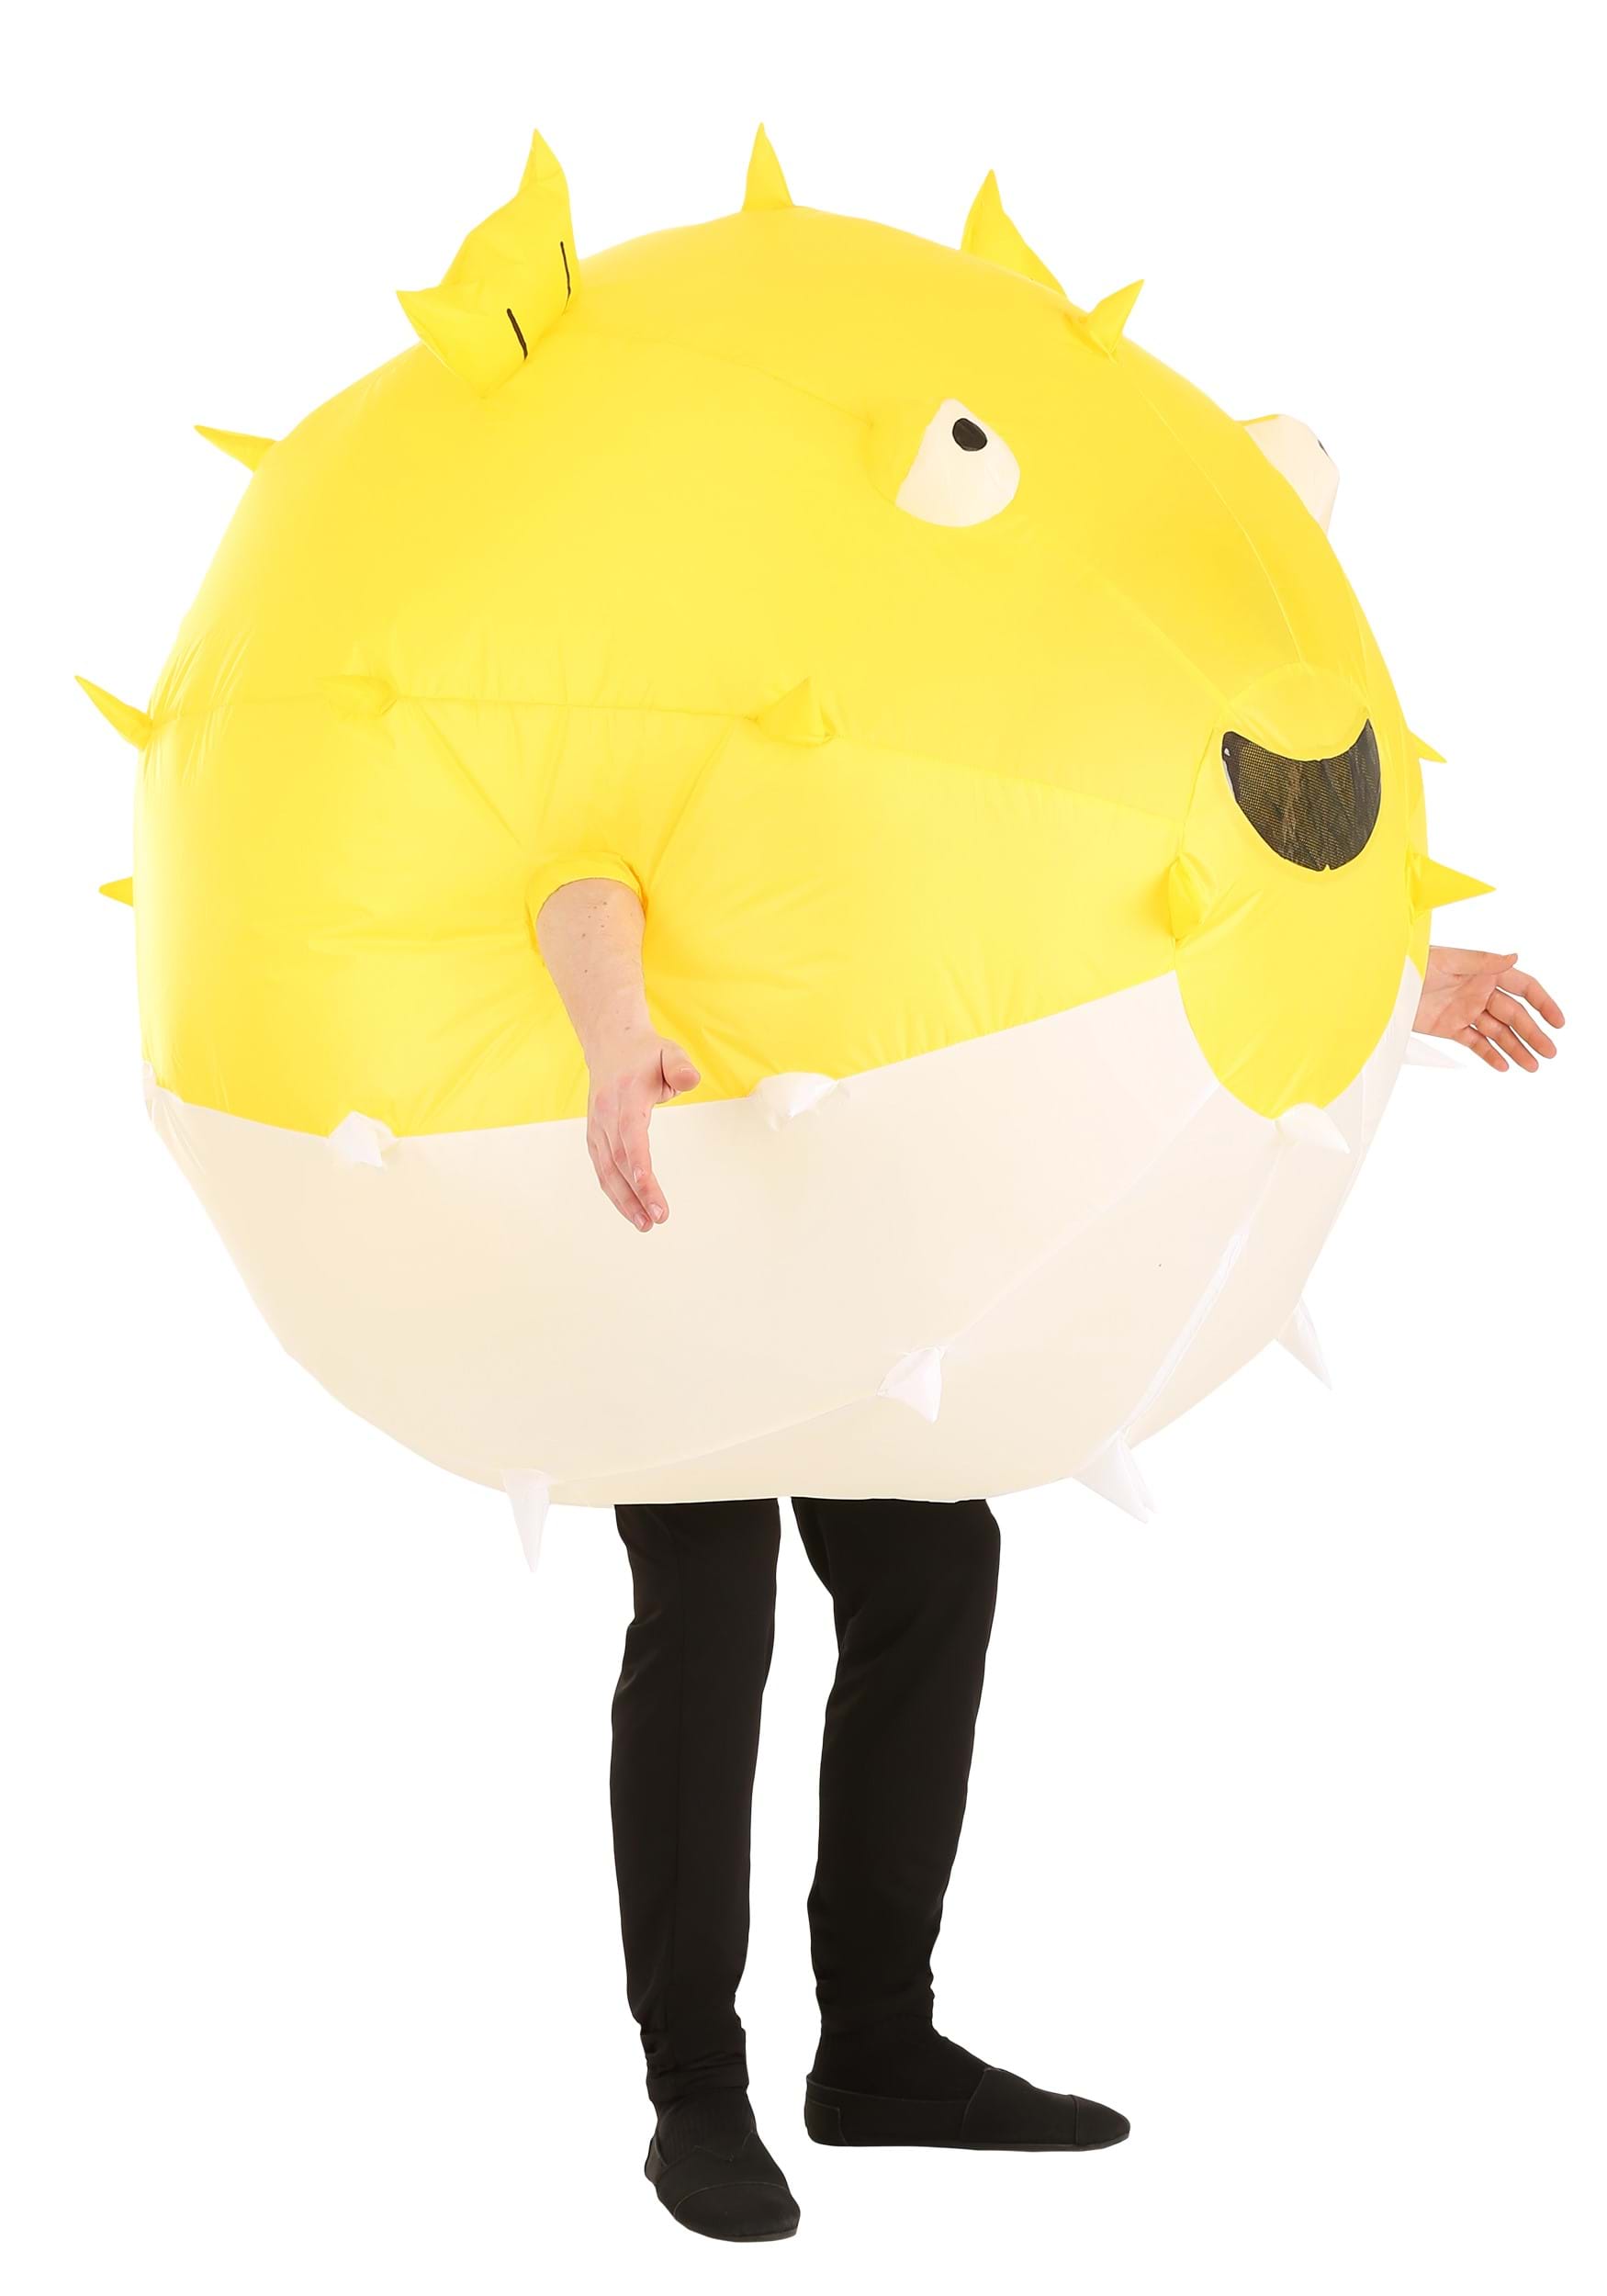 https://images.halloweencostumes.ca/products/41557/2-1-174627/adult-inflatable-puffer-fish-costume-alt-1.jpg